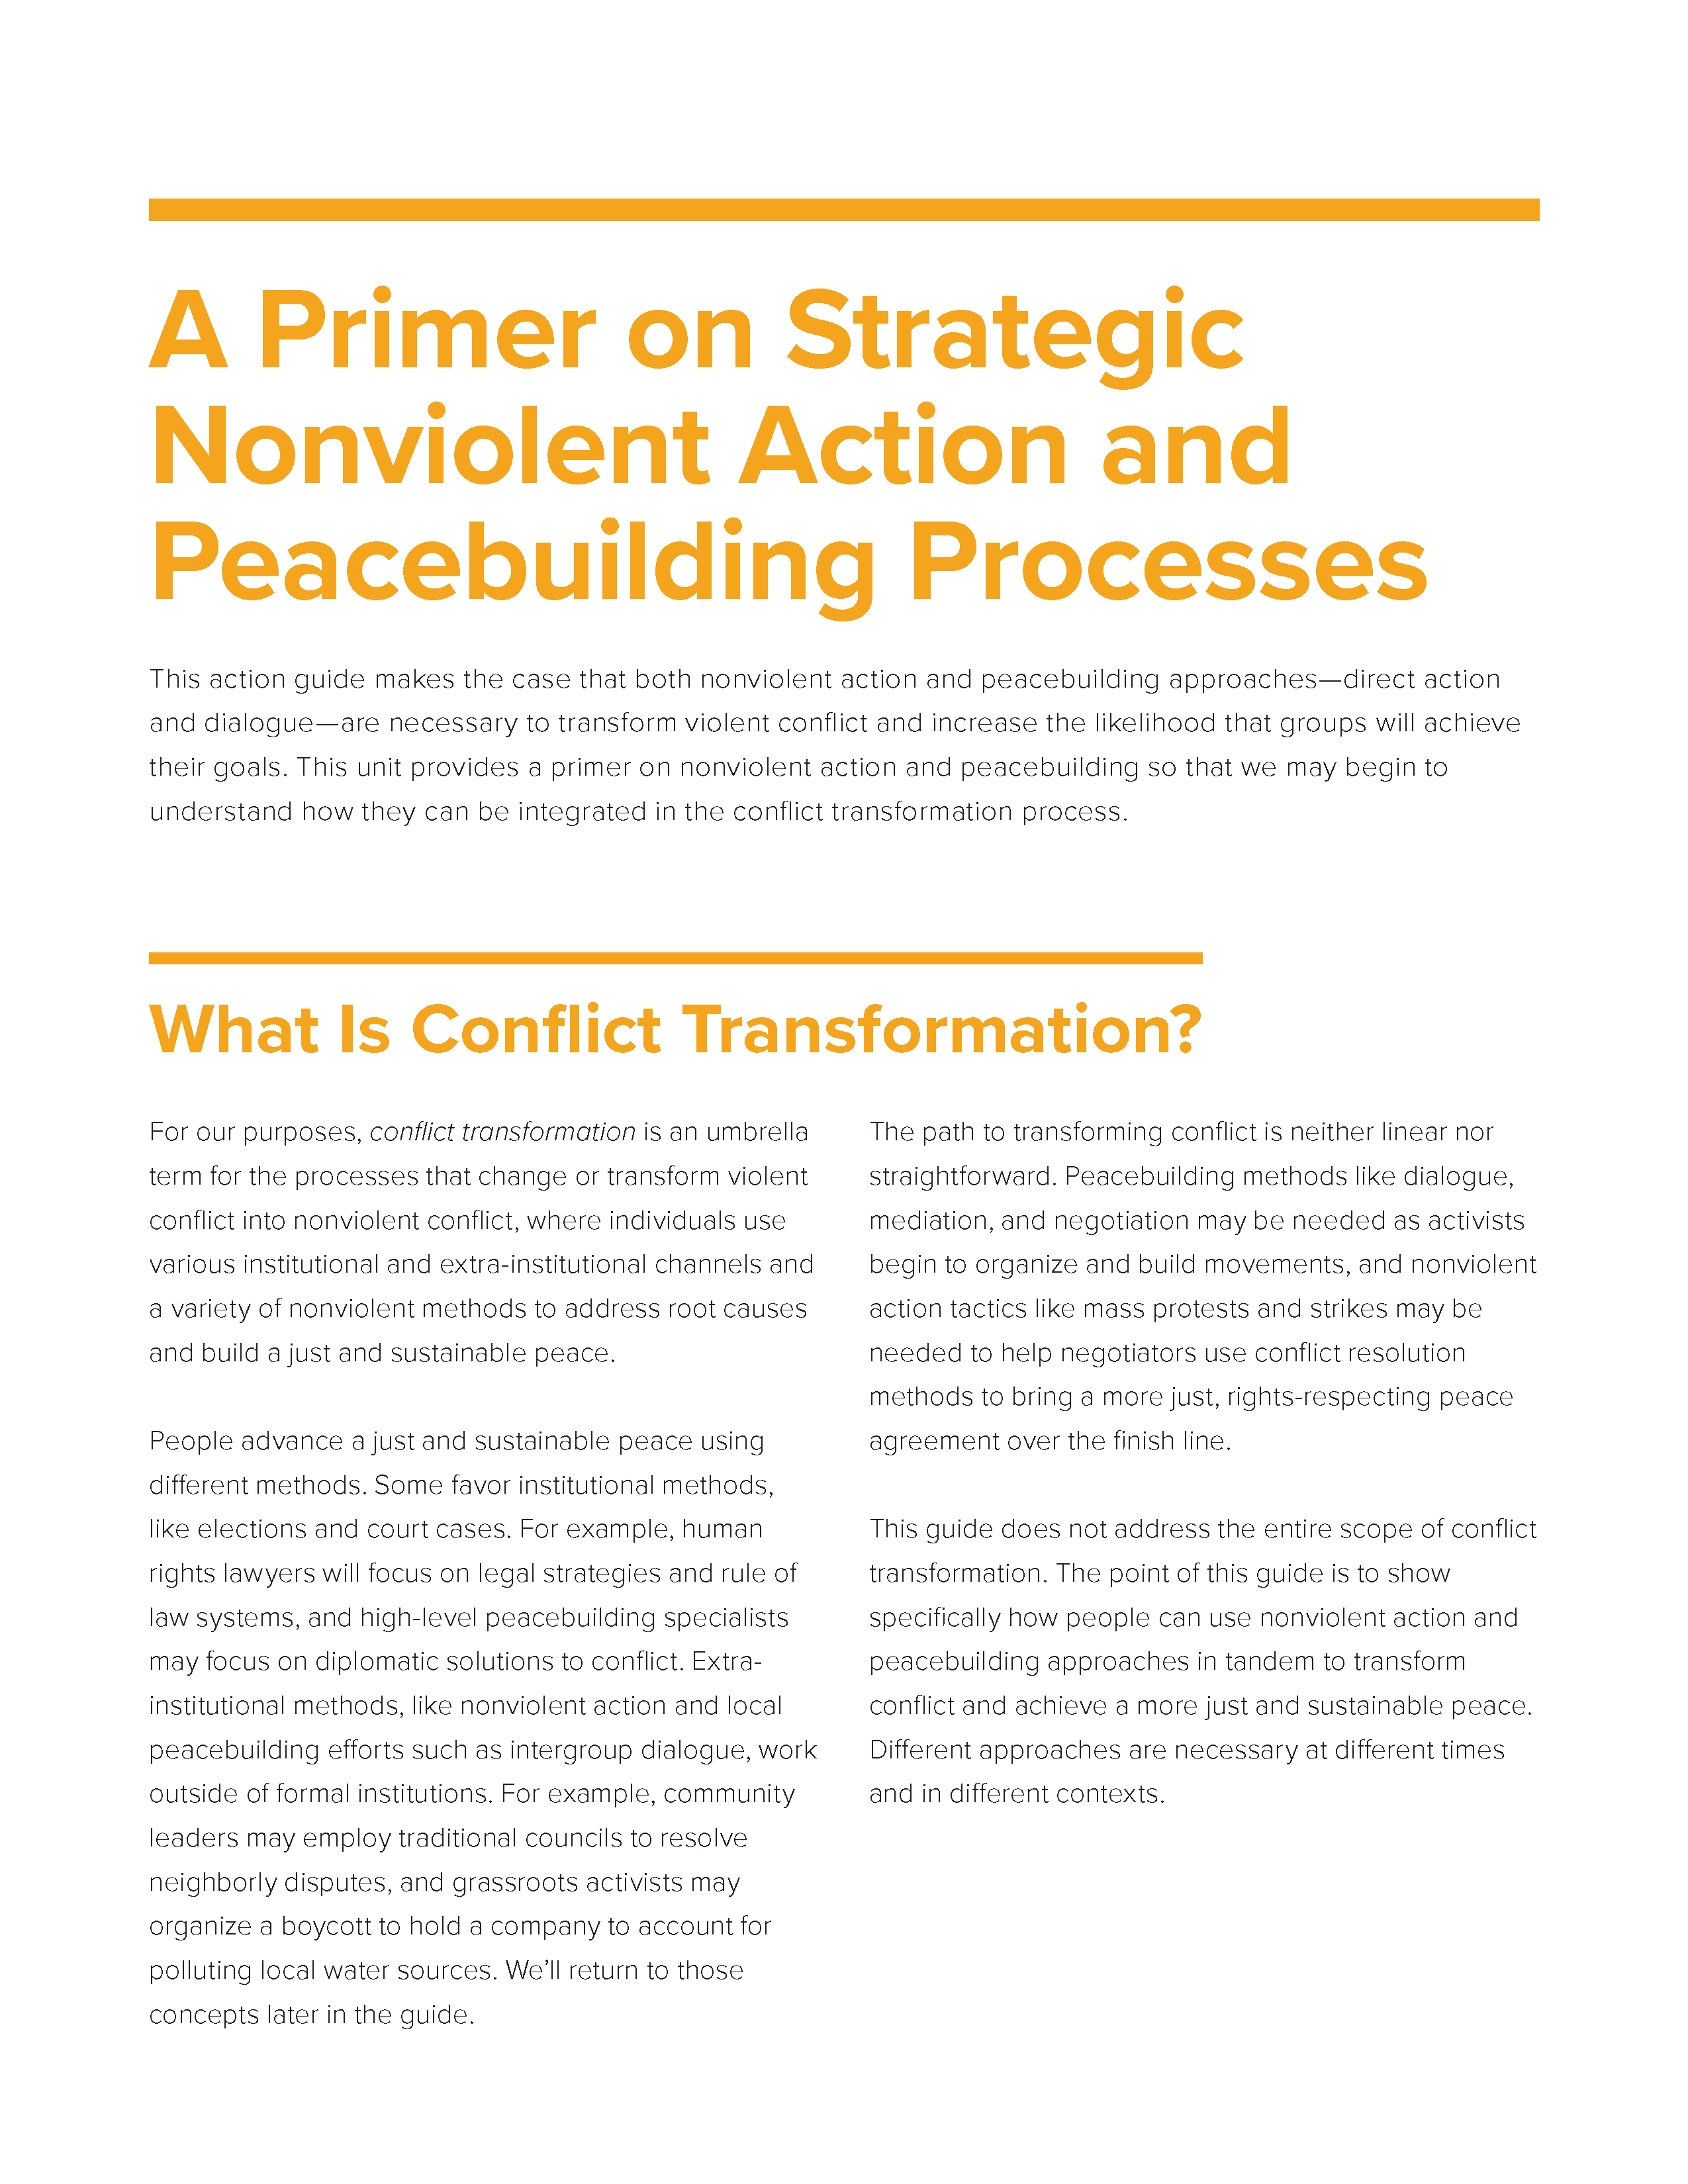 SNAP: Synergizing Nonviolent Action and Peacebuilding